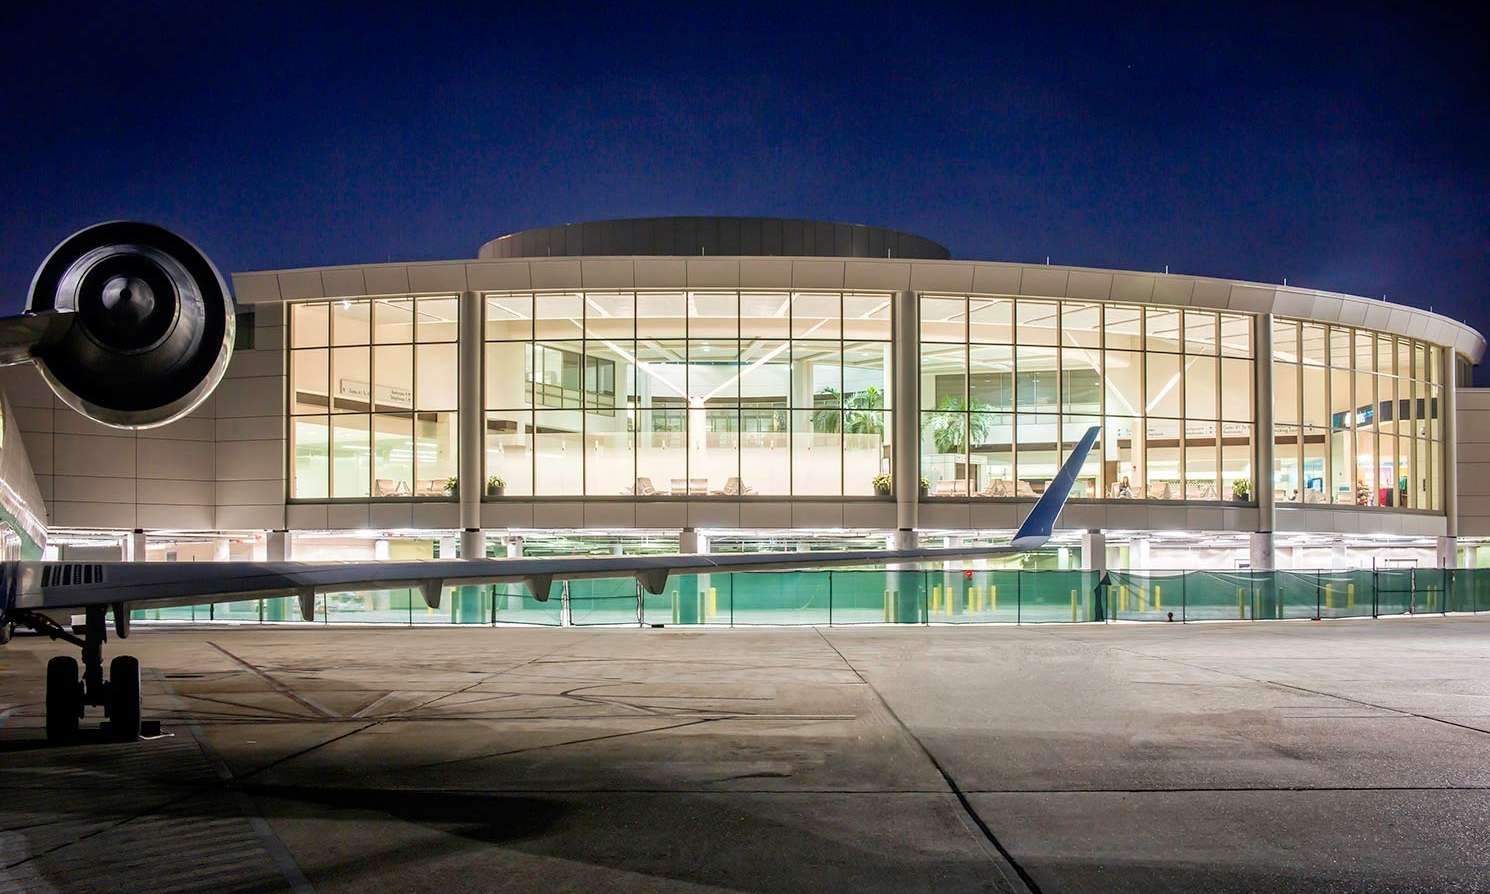 Exterior image of the Baton Rouge Metropolitan Airport Terminal Expansion from the runway apron